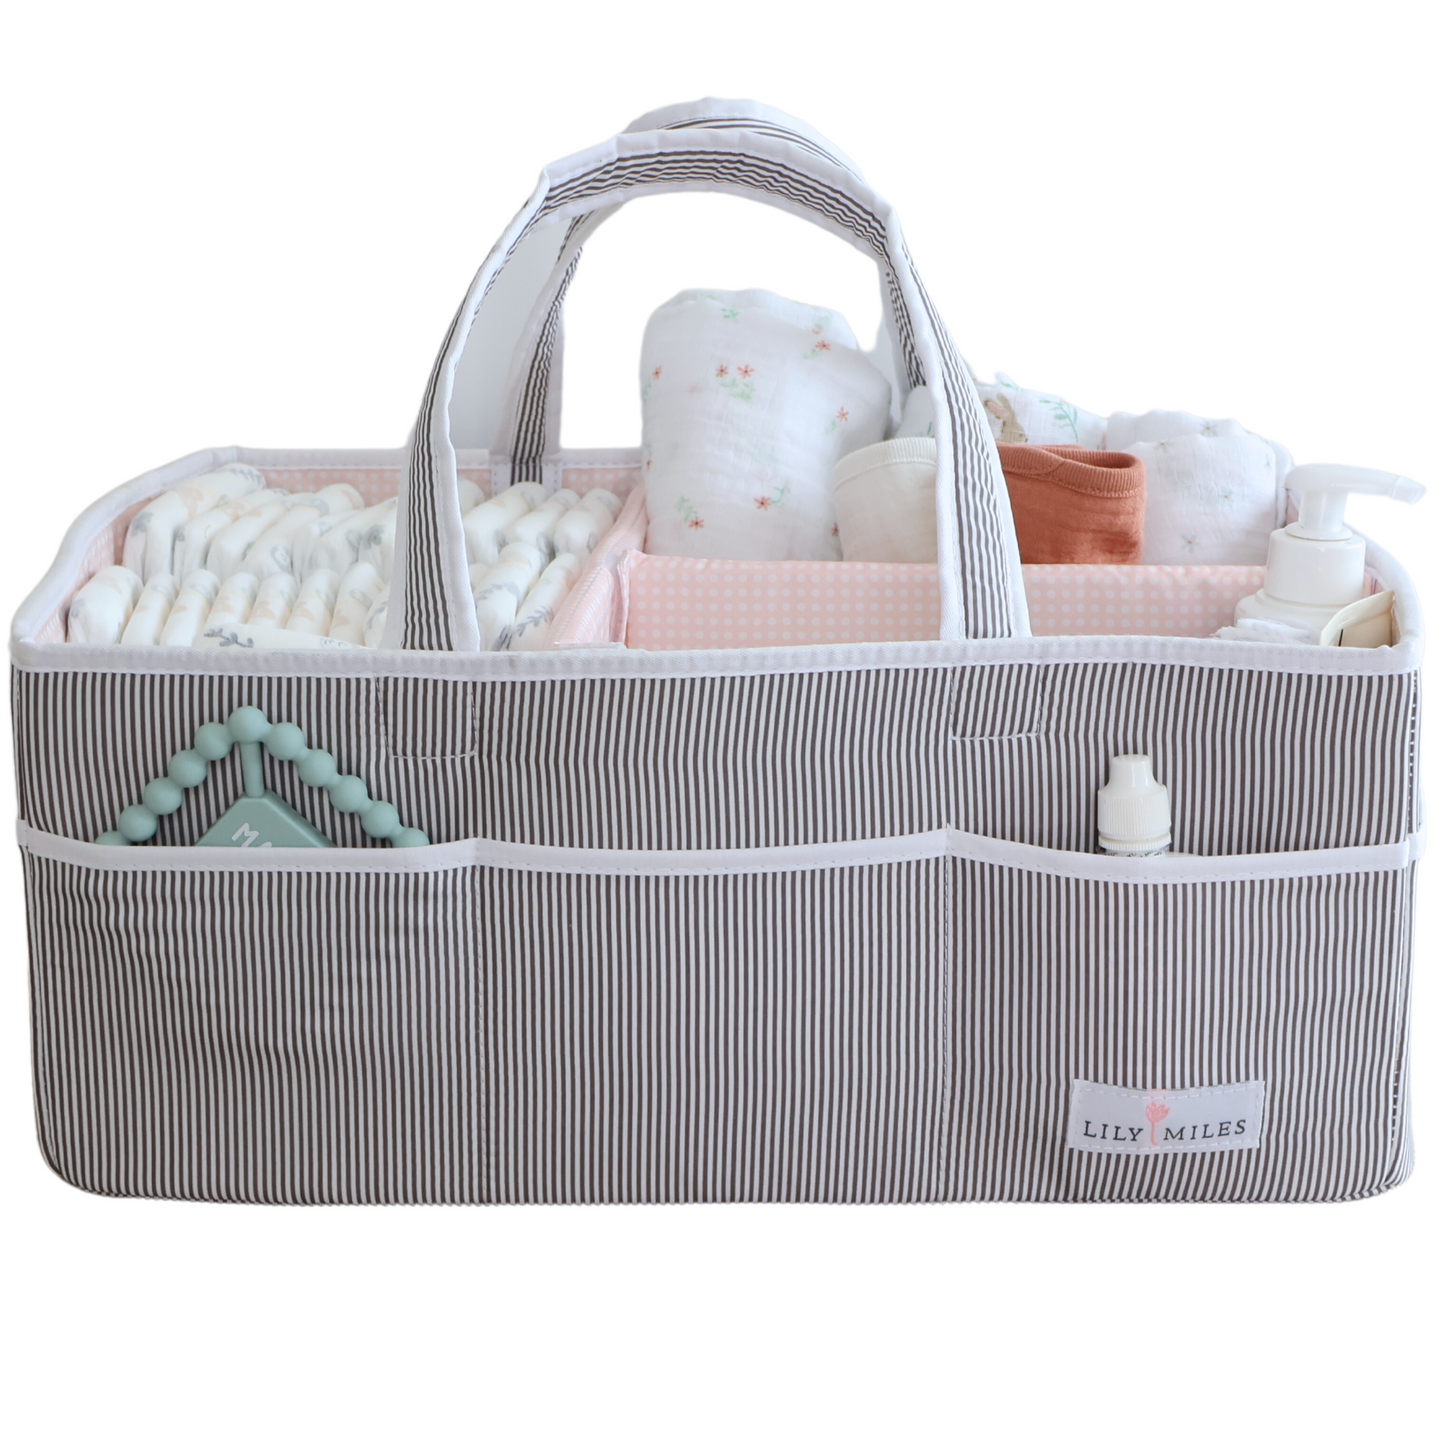 Extra Large Diaper Caddy - Gray/Blush